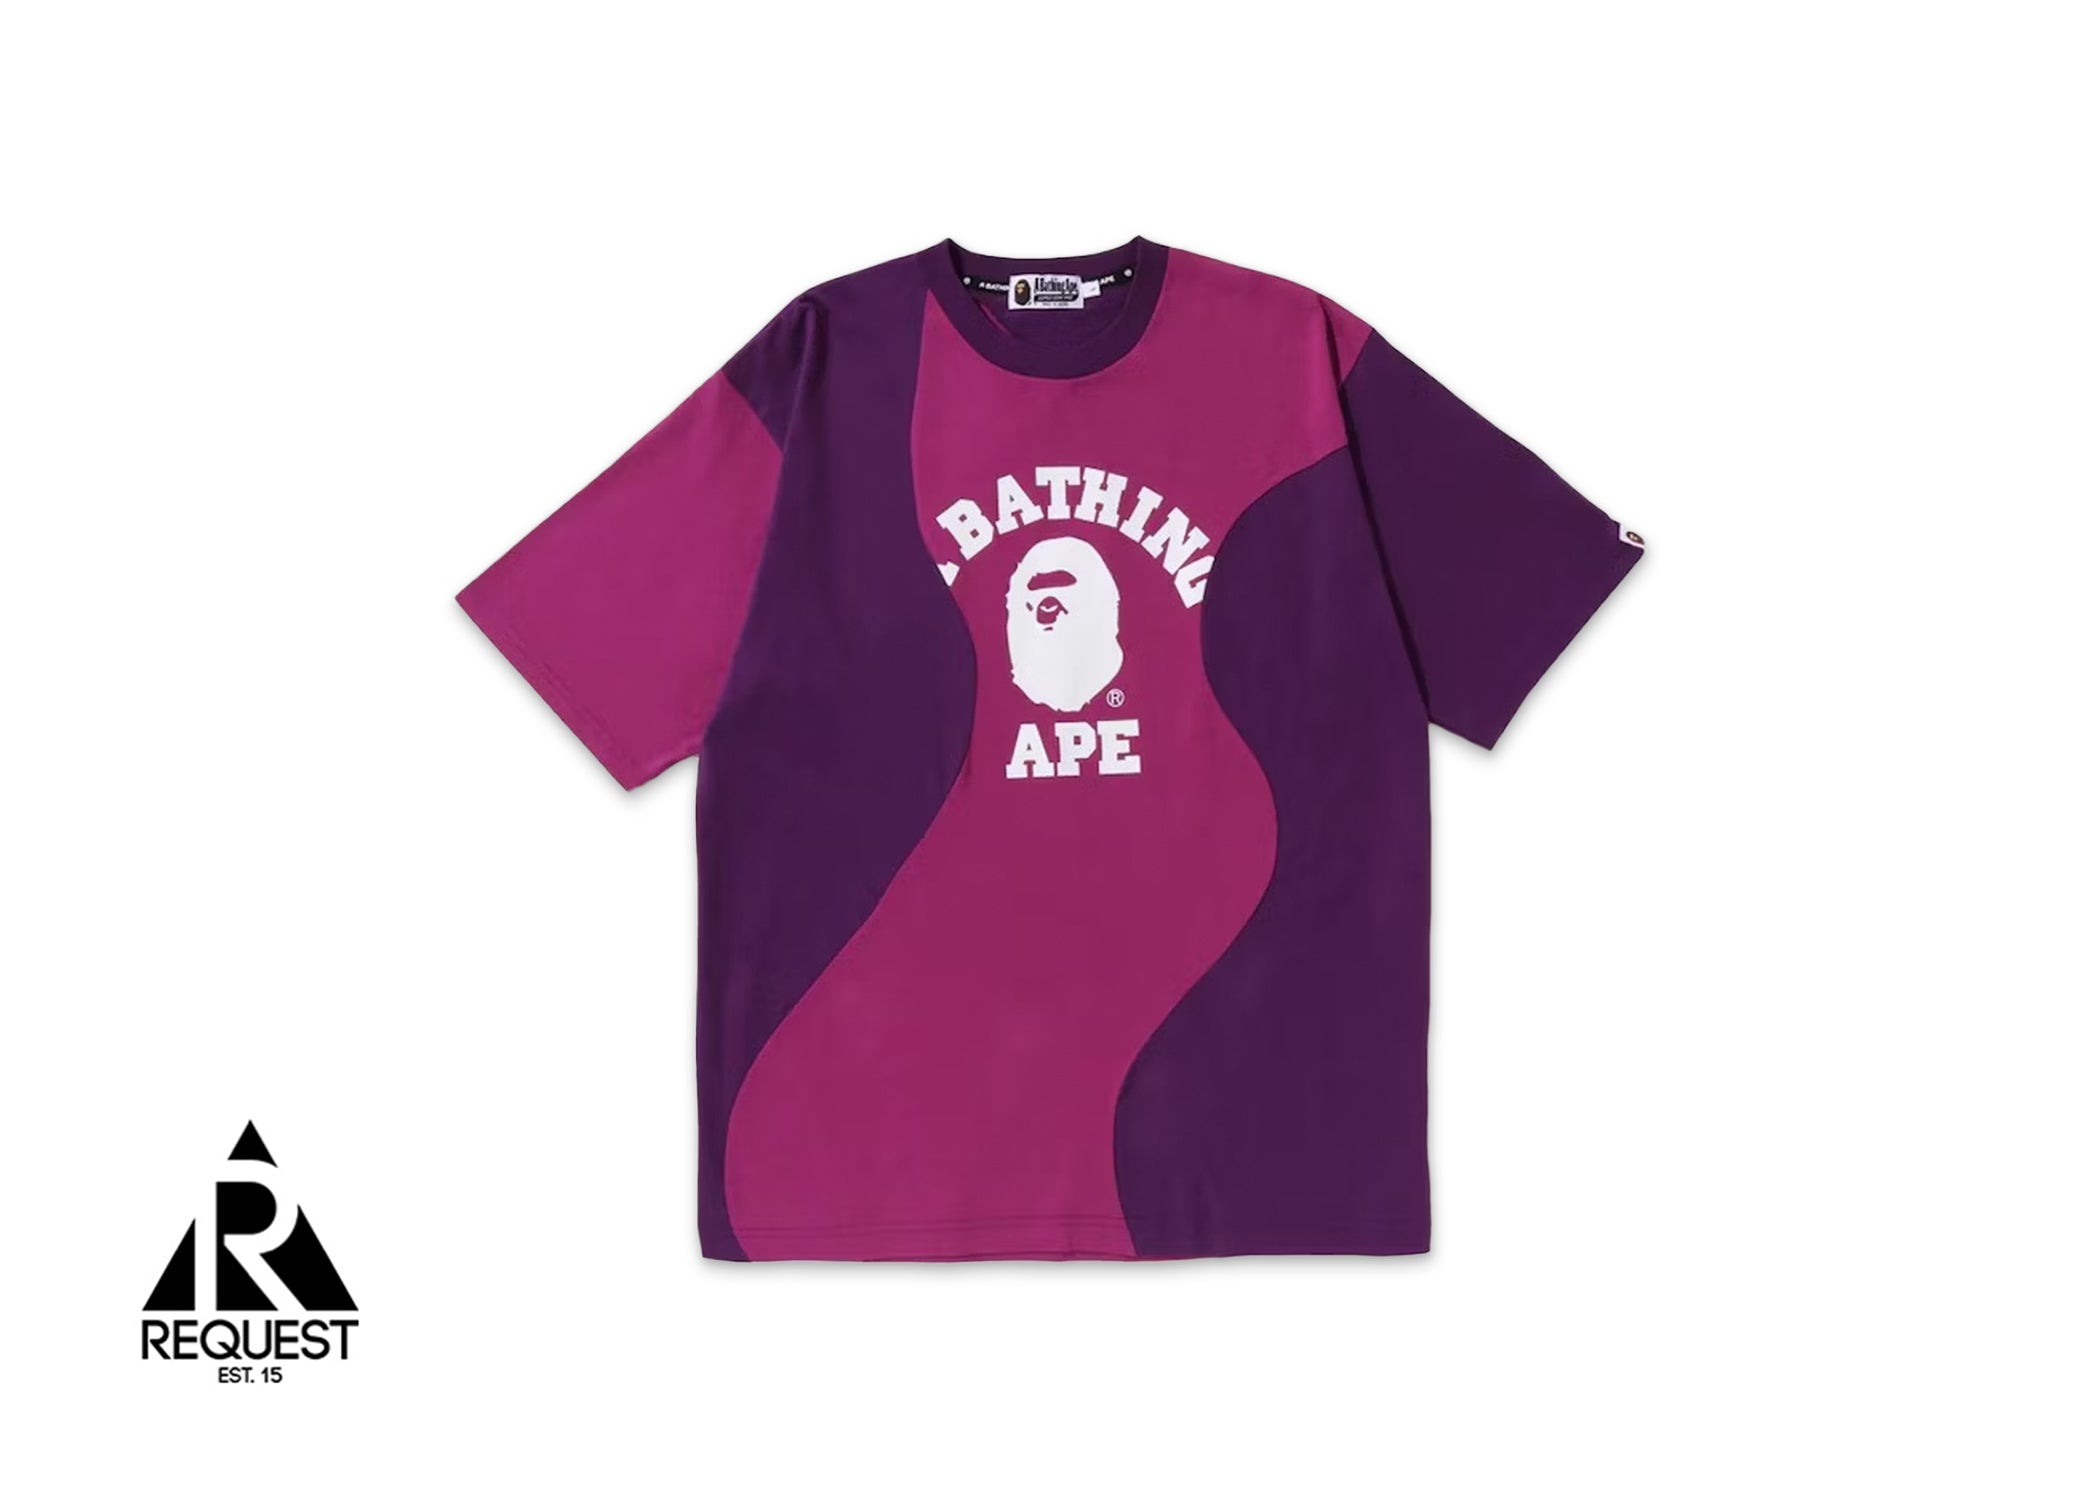 A Bathing Ape BAPE Cutting College Relaxed Fit Tee "Purple"